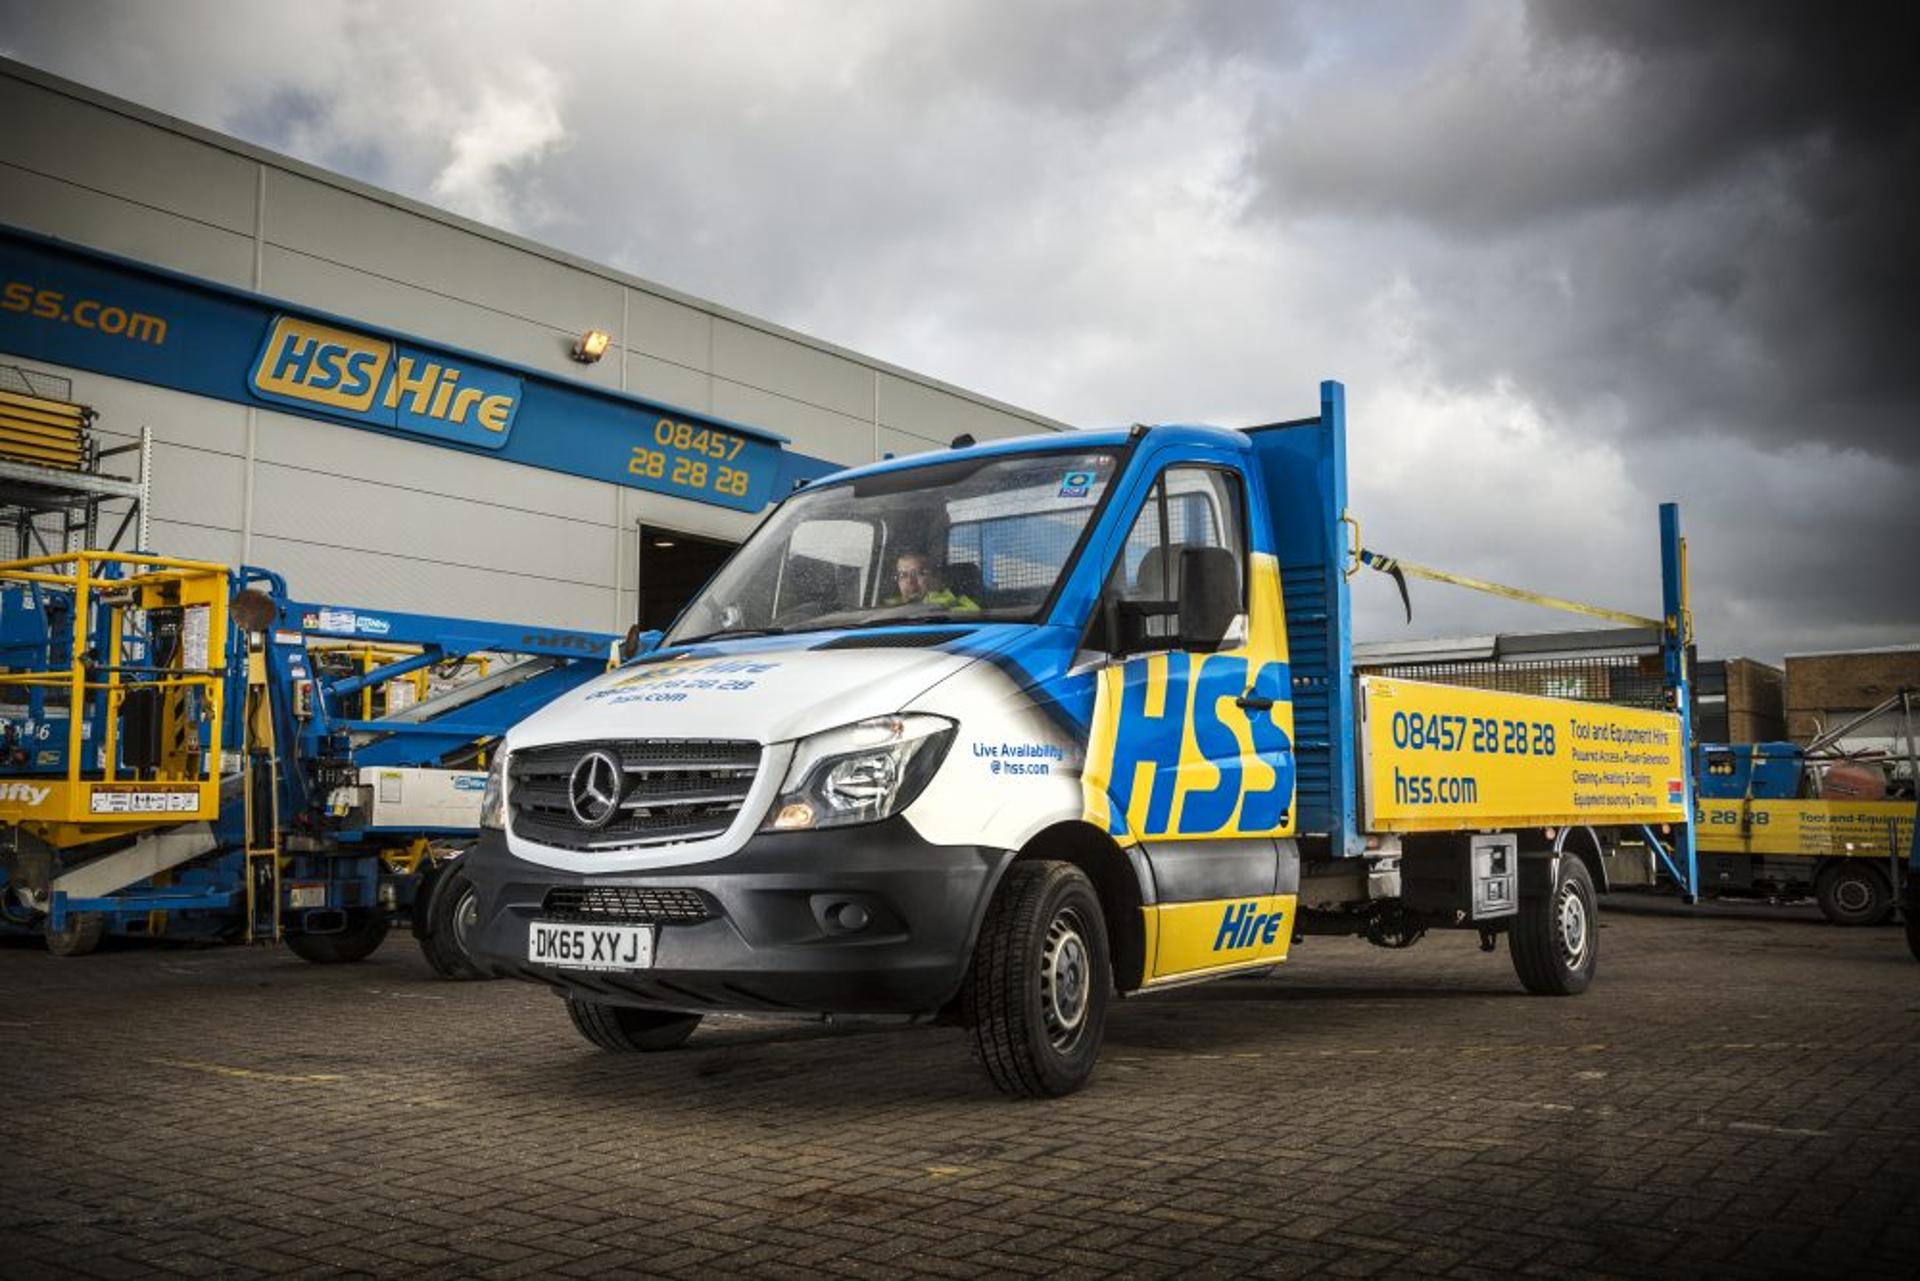 HSS sells heating and air conditioning hire firm for 9.1x profits